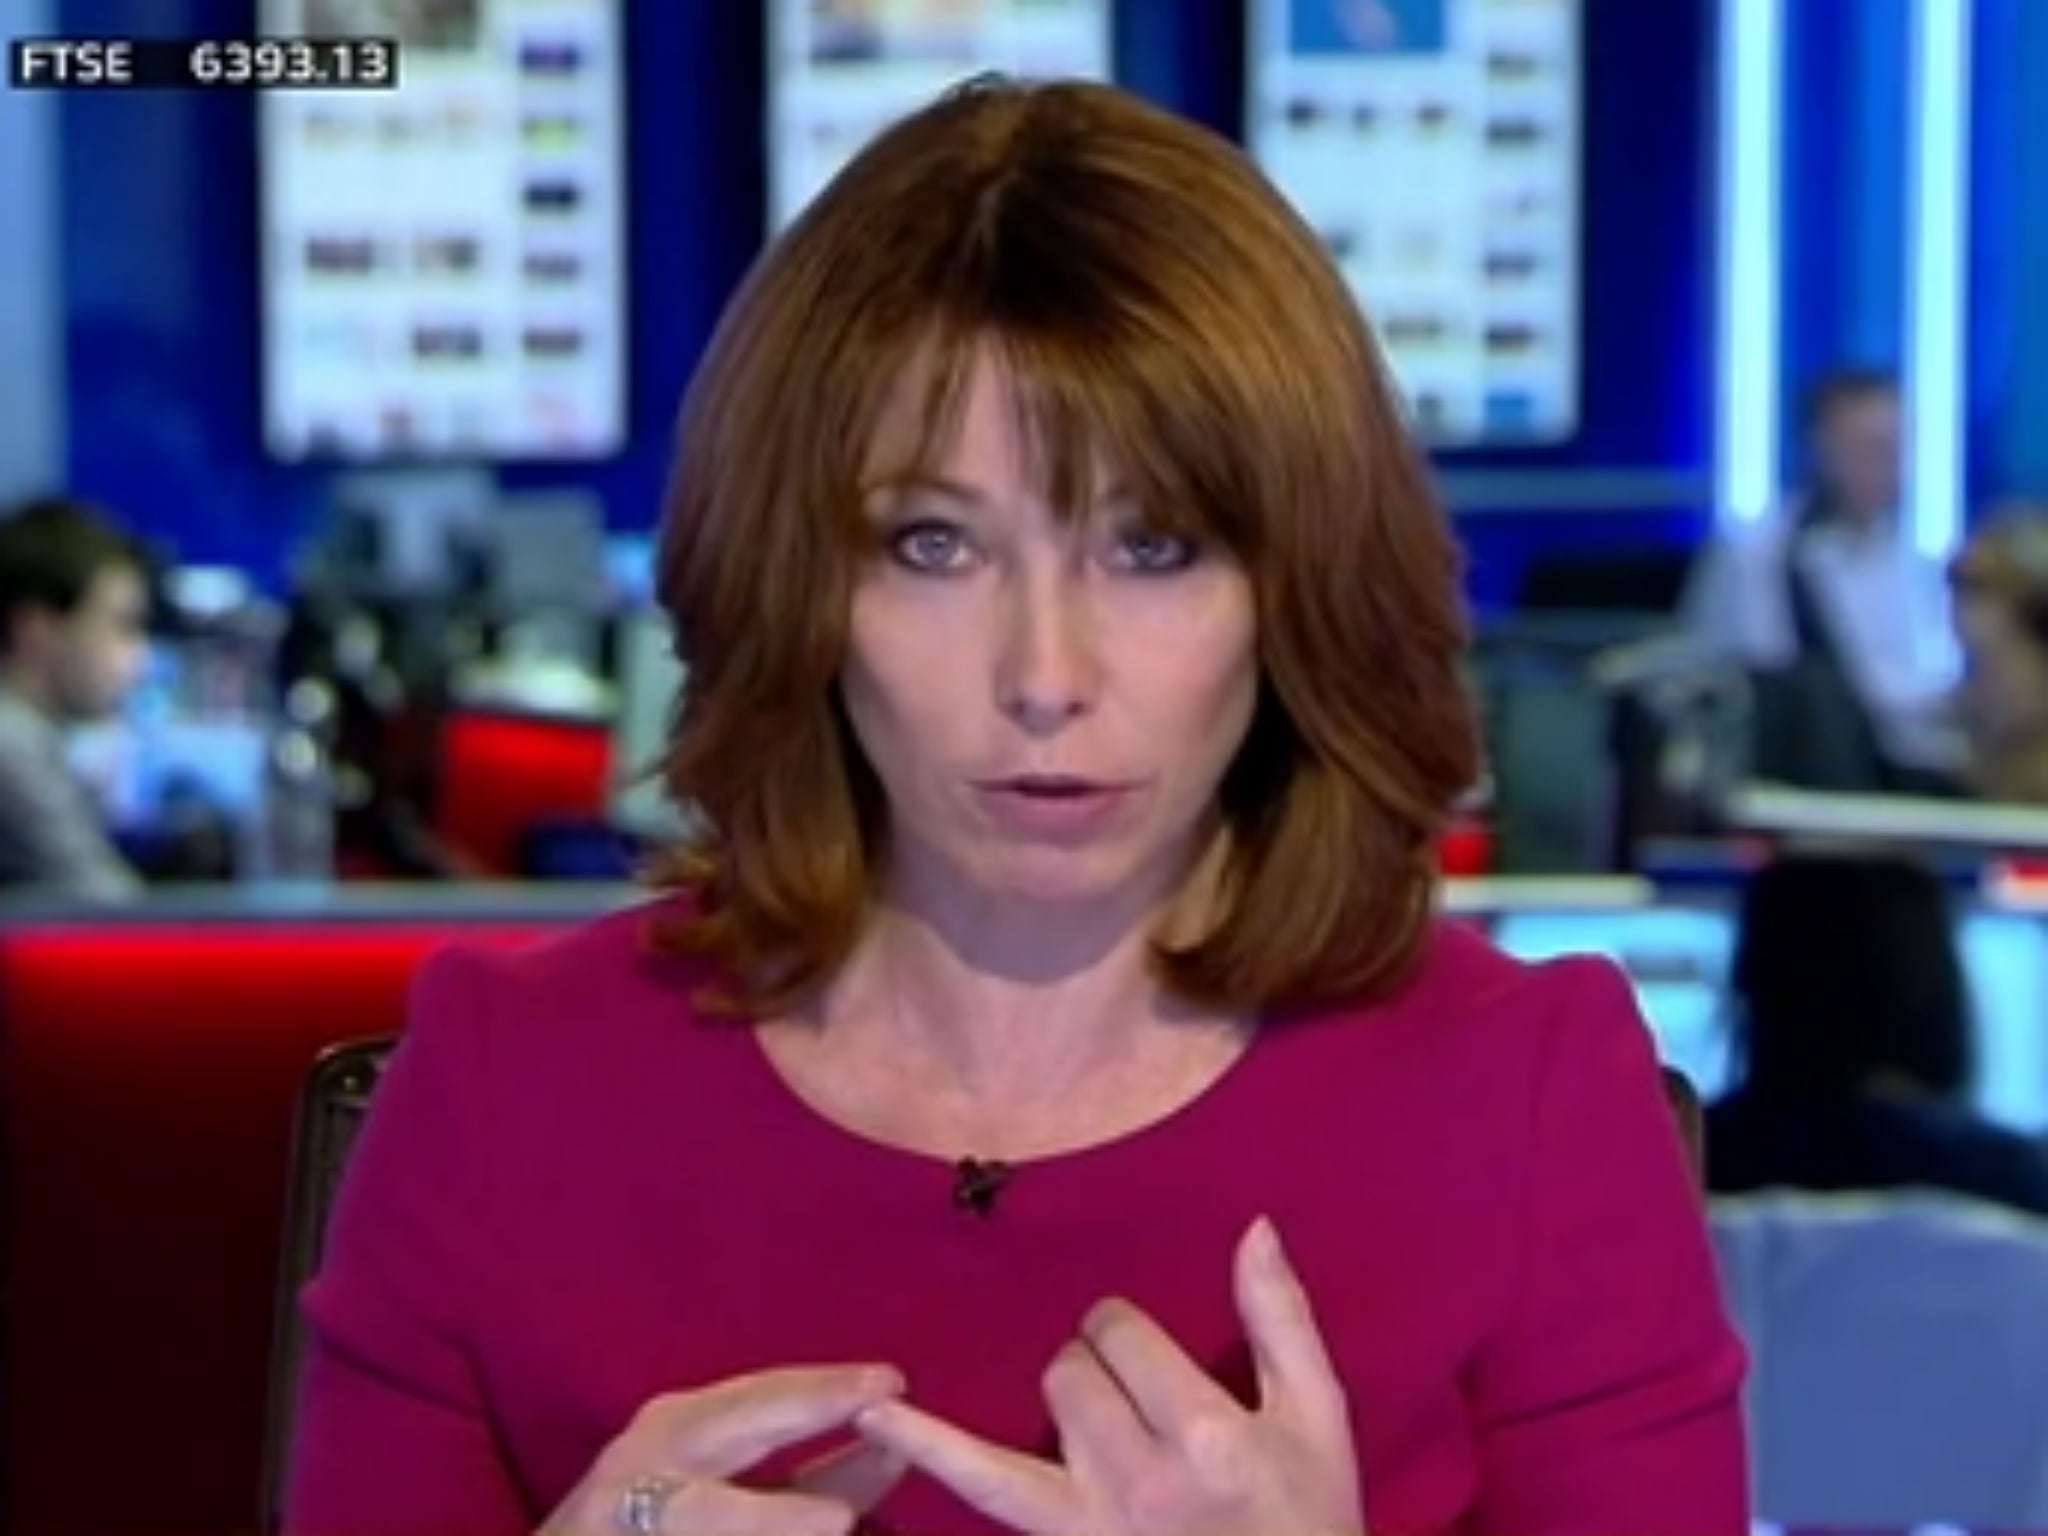 Kay Burley thanked her followers for correcting her, saying some had been more polite than others